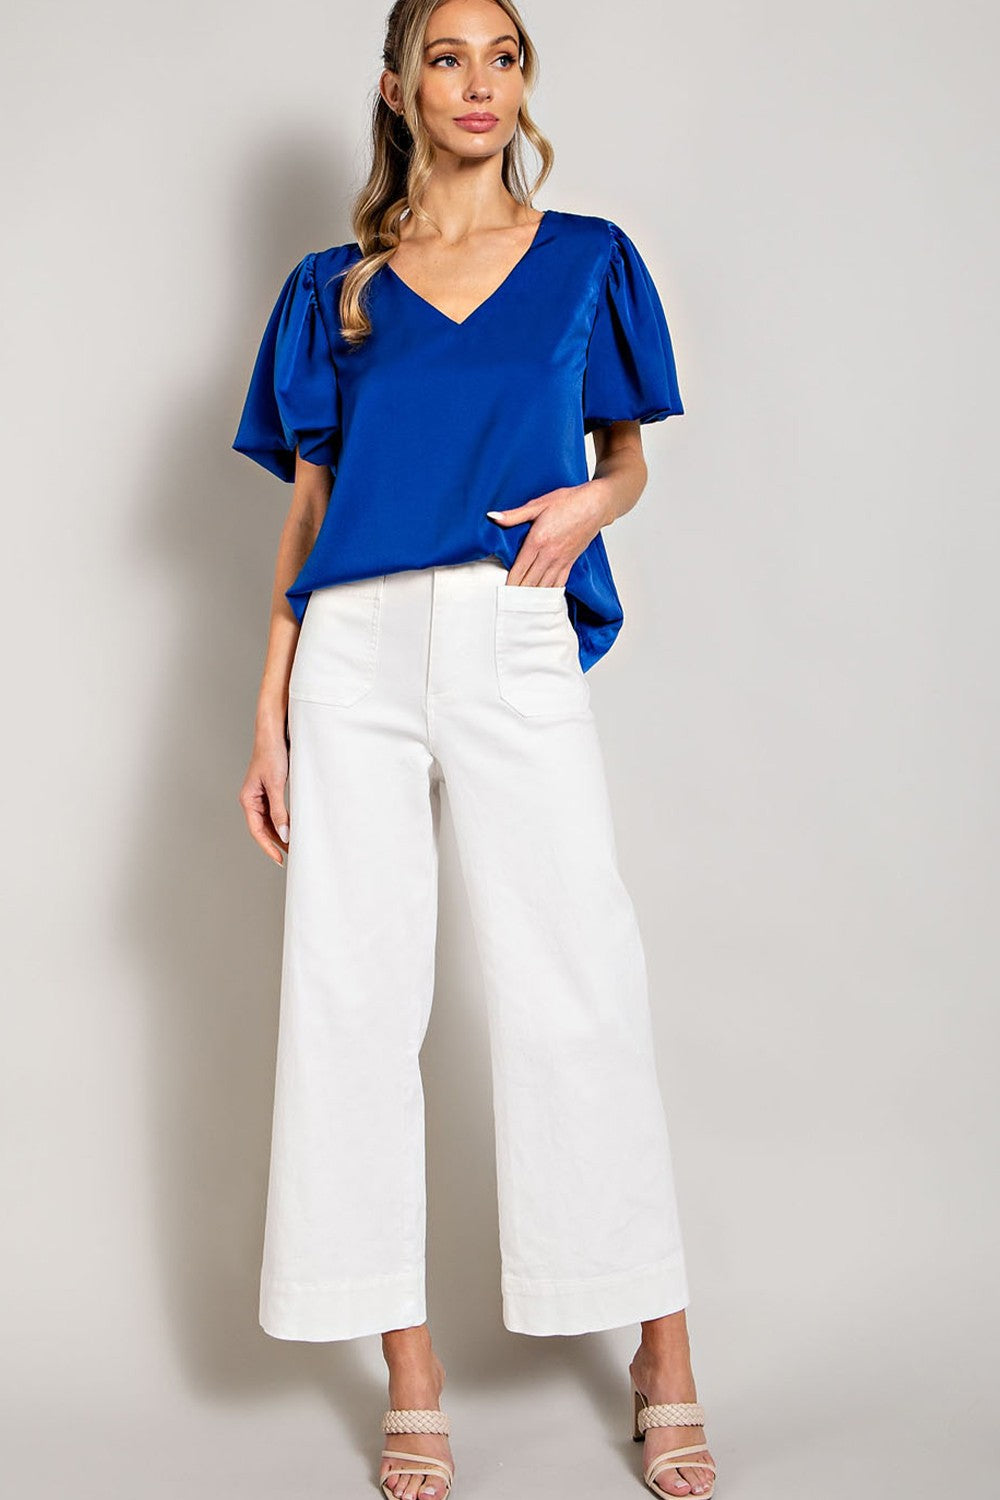 V-neck blouse top featuring short puff sleeves